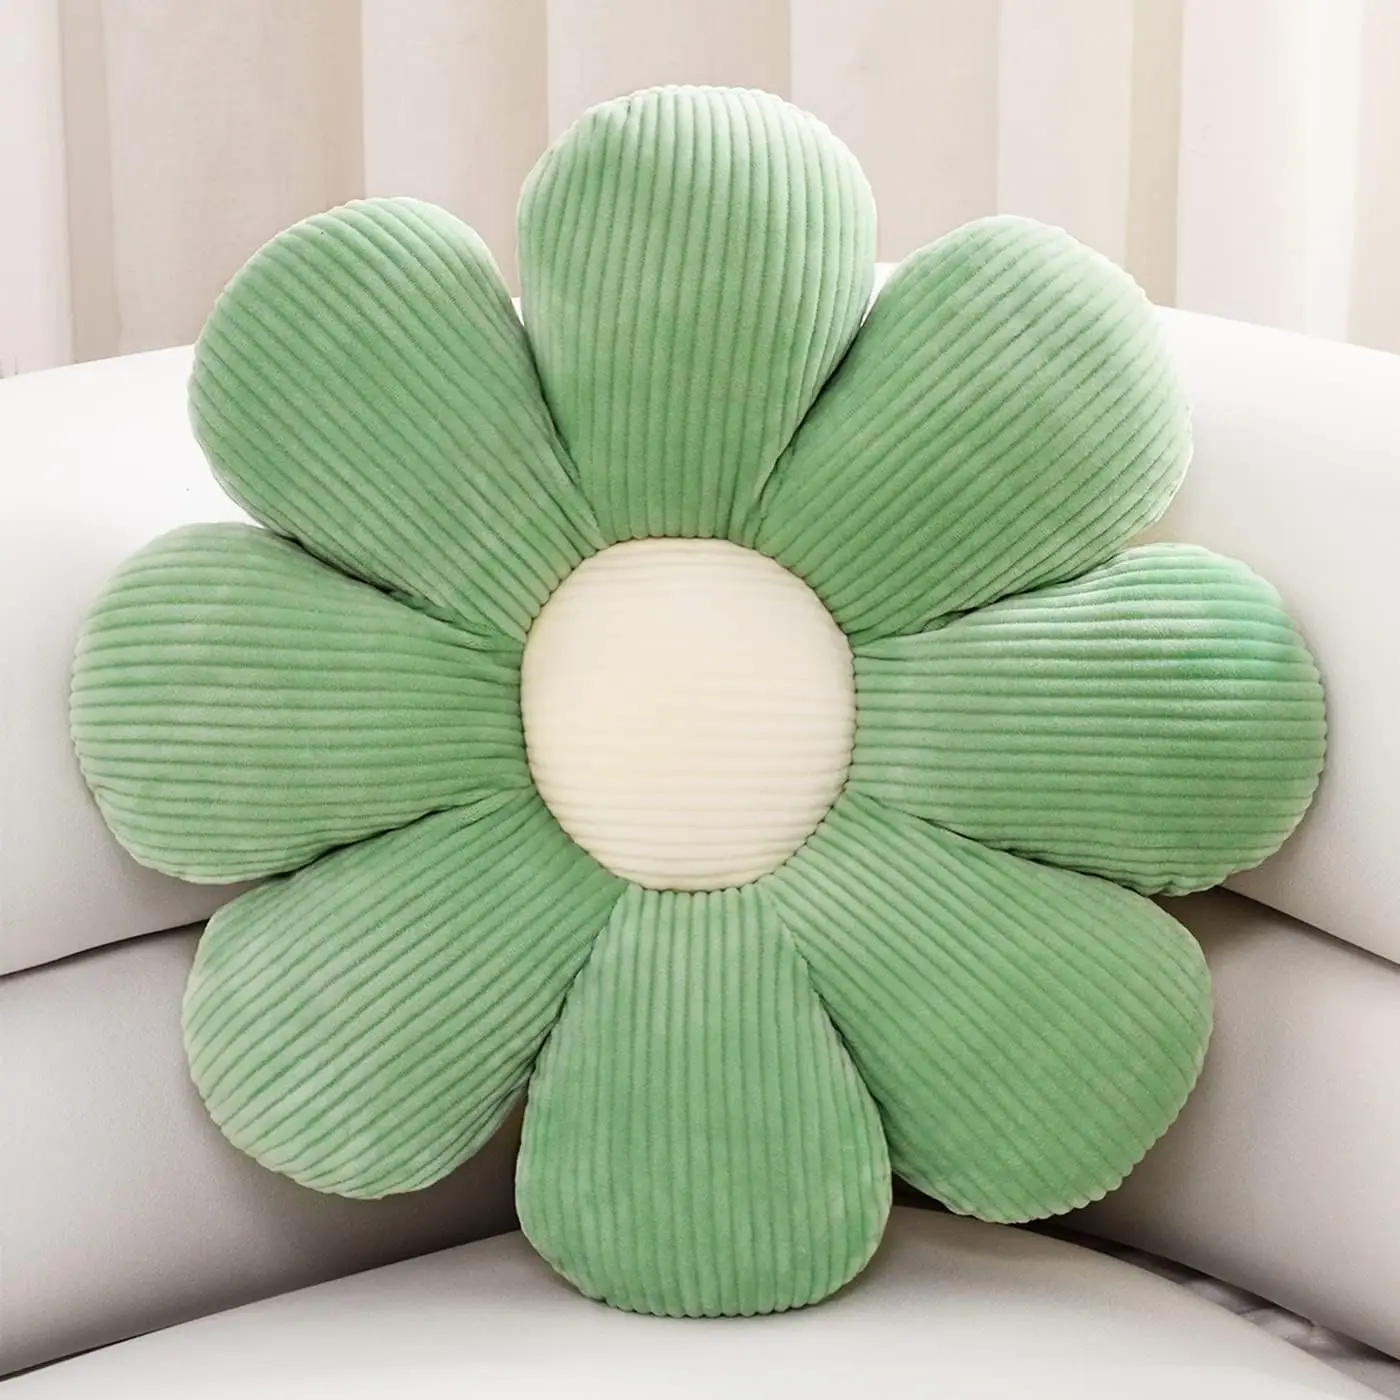 https://ae01.alicdn.com/kf/Se55f11005bd84a7d8eb9f4a16c714bf14/Cute-Green-Flower-Pillow-Comfortable-Floor-Cushions-Soft-Plant-Pillows-Preppy-Aesthetic-Room-Decor-for-Couch.jpg